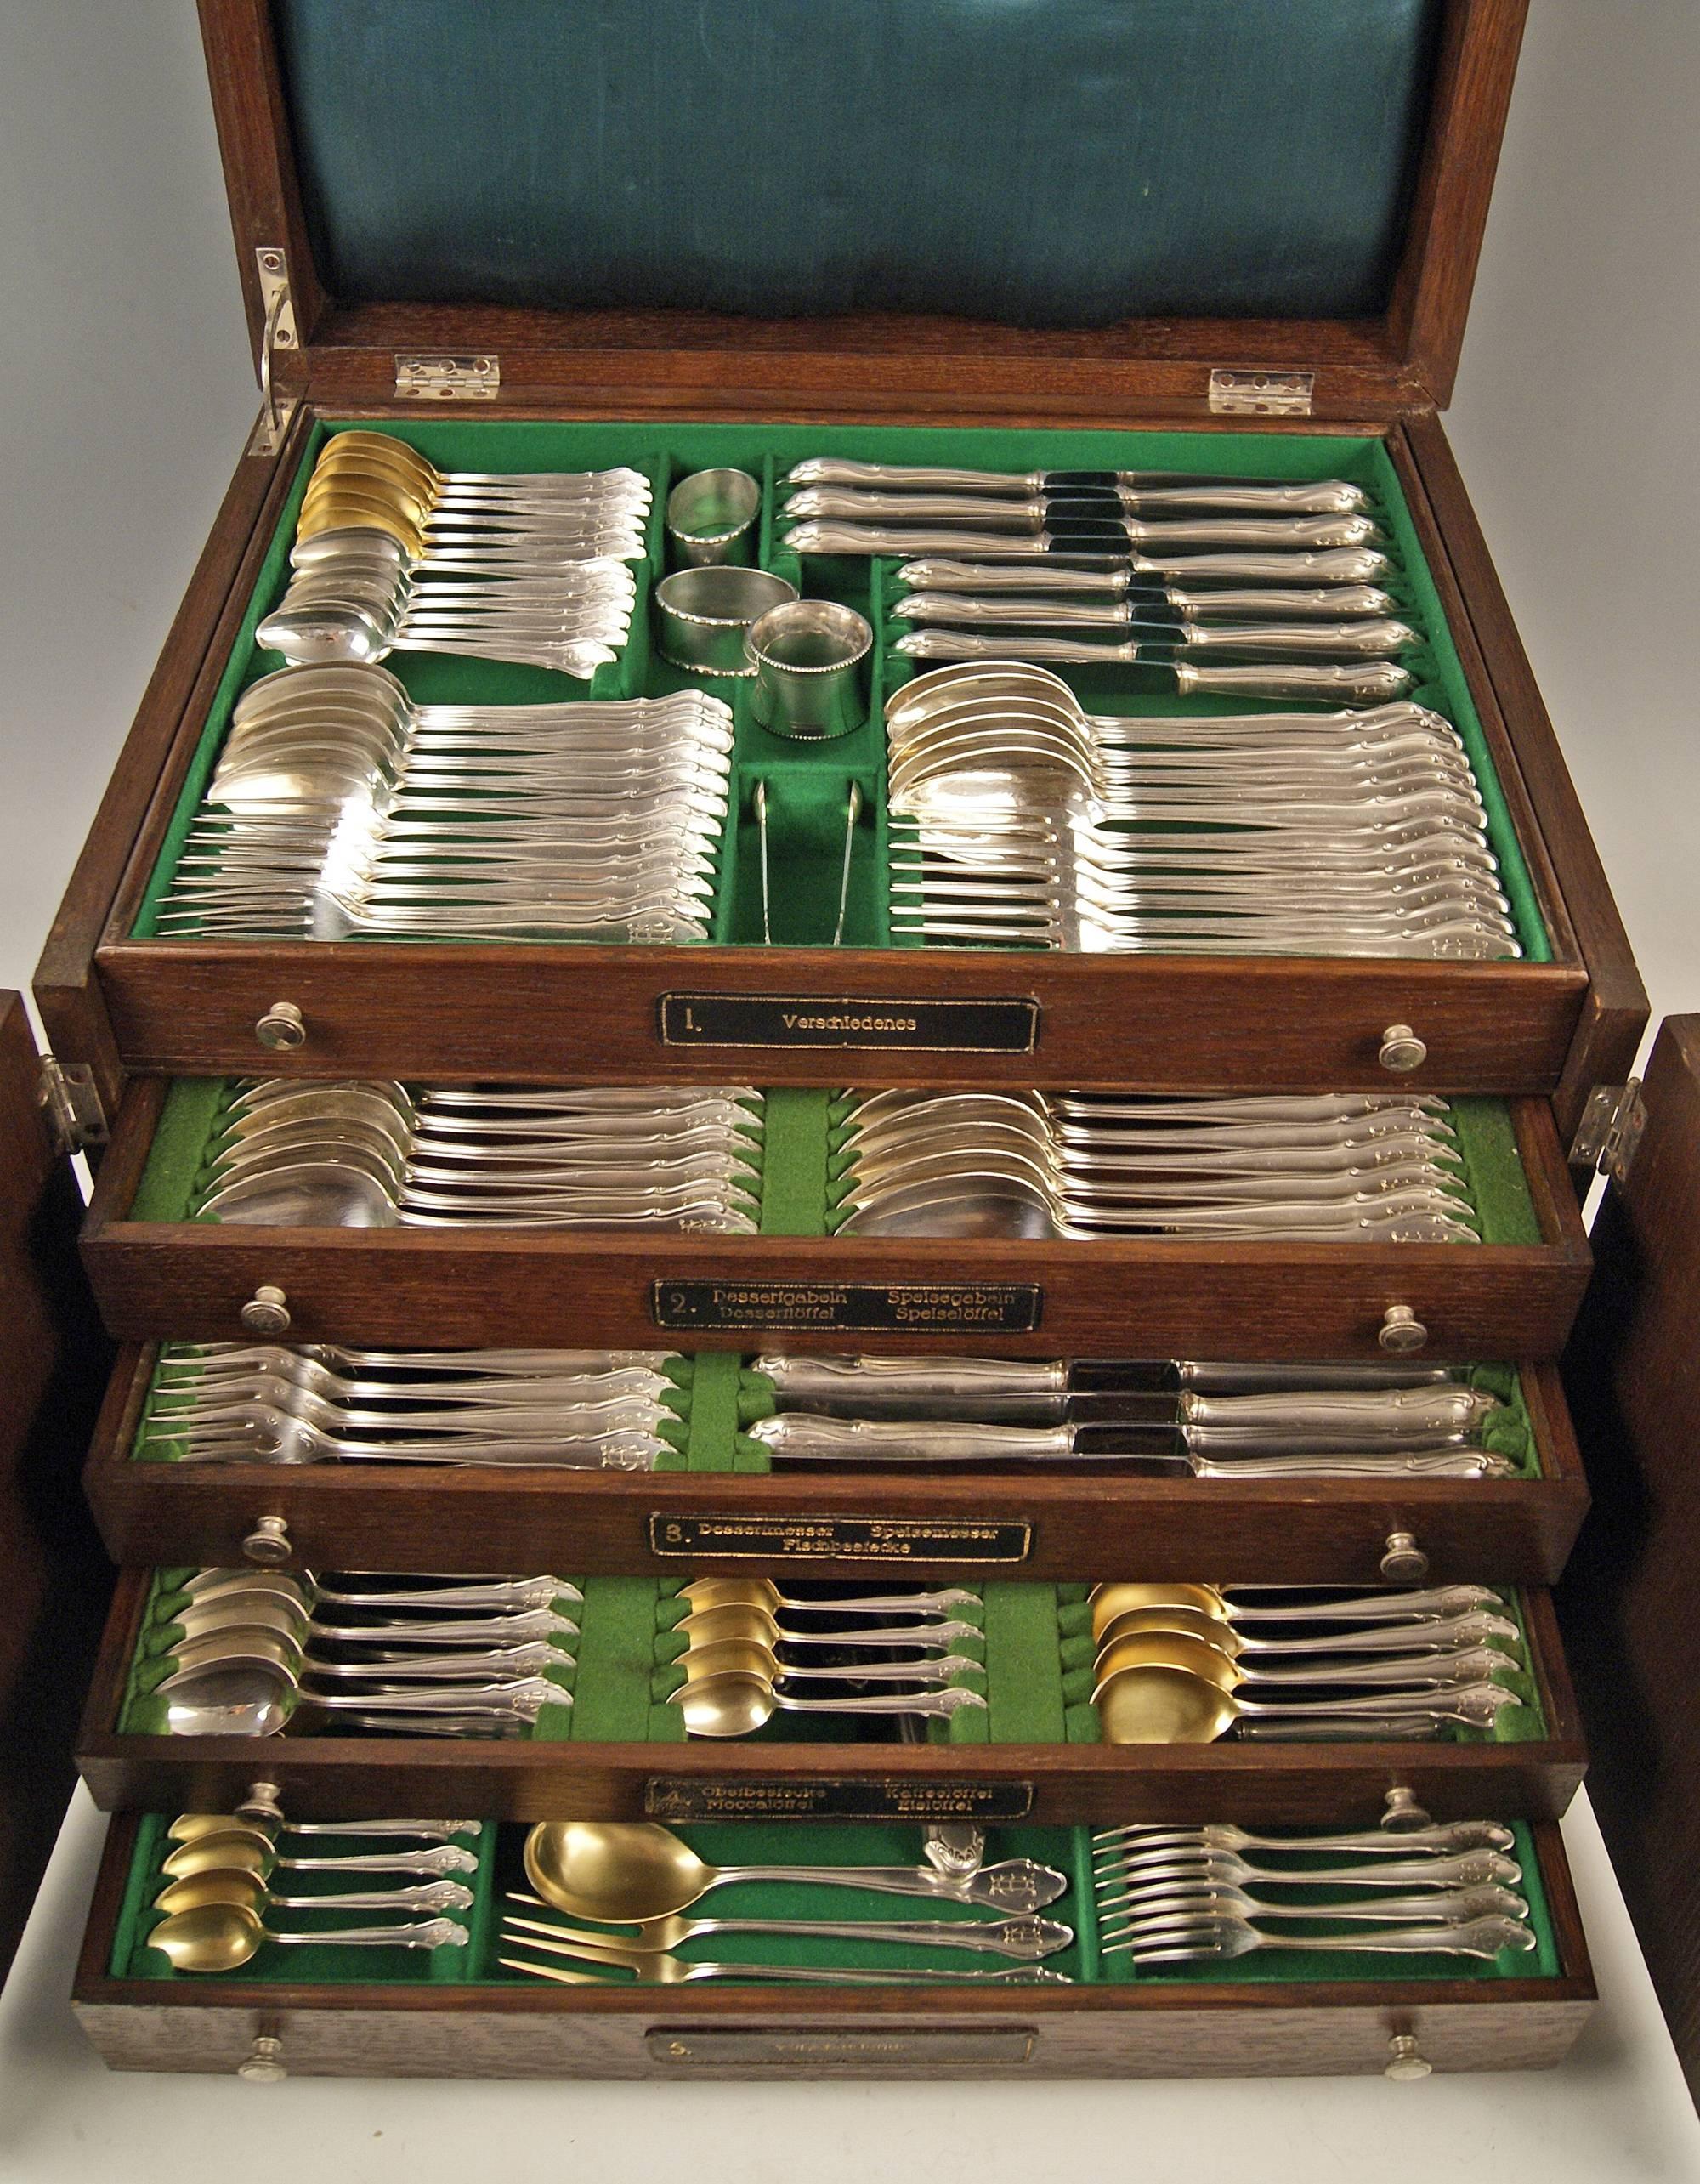 Silver 264-piece flatware (cutlery set) for 18 persons,
Made by Koch & Bergfeld, Germany / Bremen, circa 1900

Gorgeous German cutlery set / flatware / dinnerware consisting of 264 pieces. Most elegant design = Baroque FORM & engraved initials